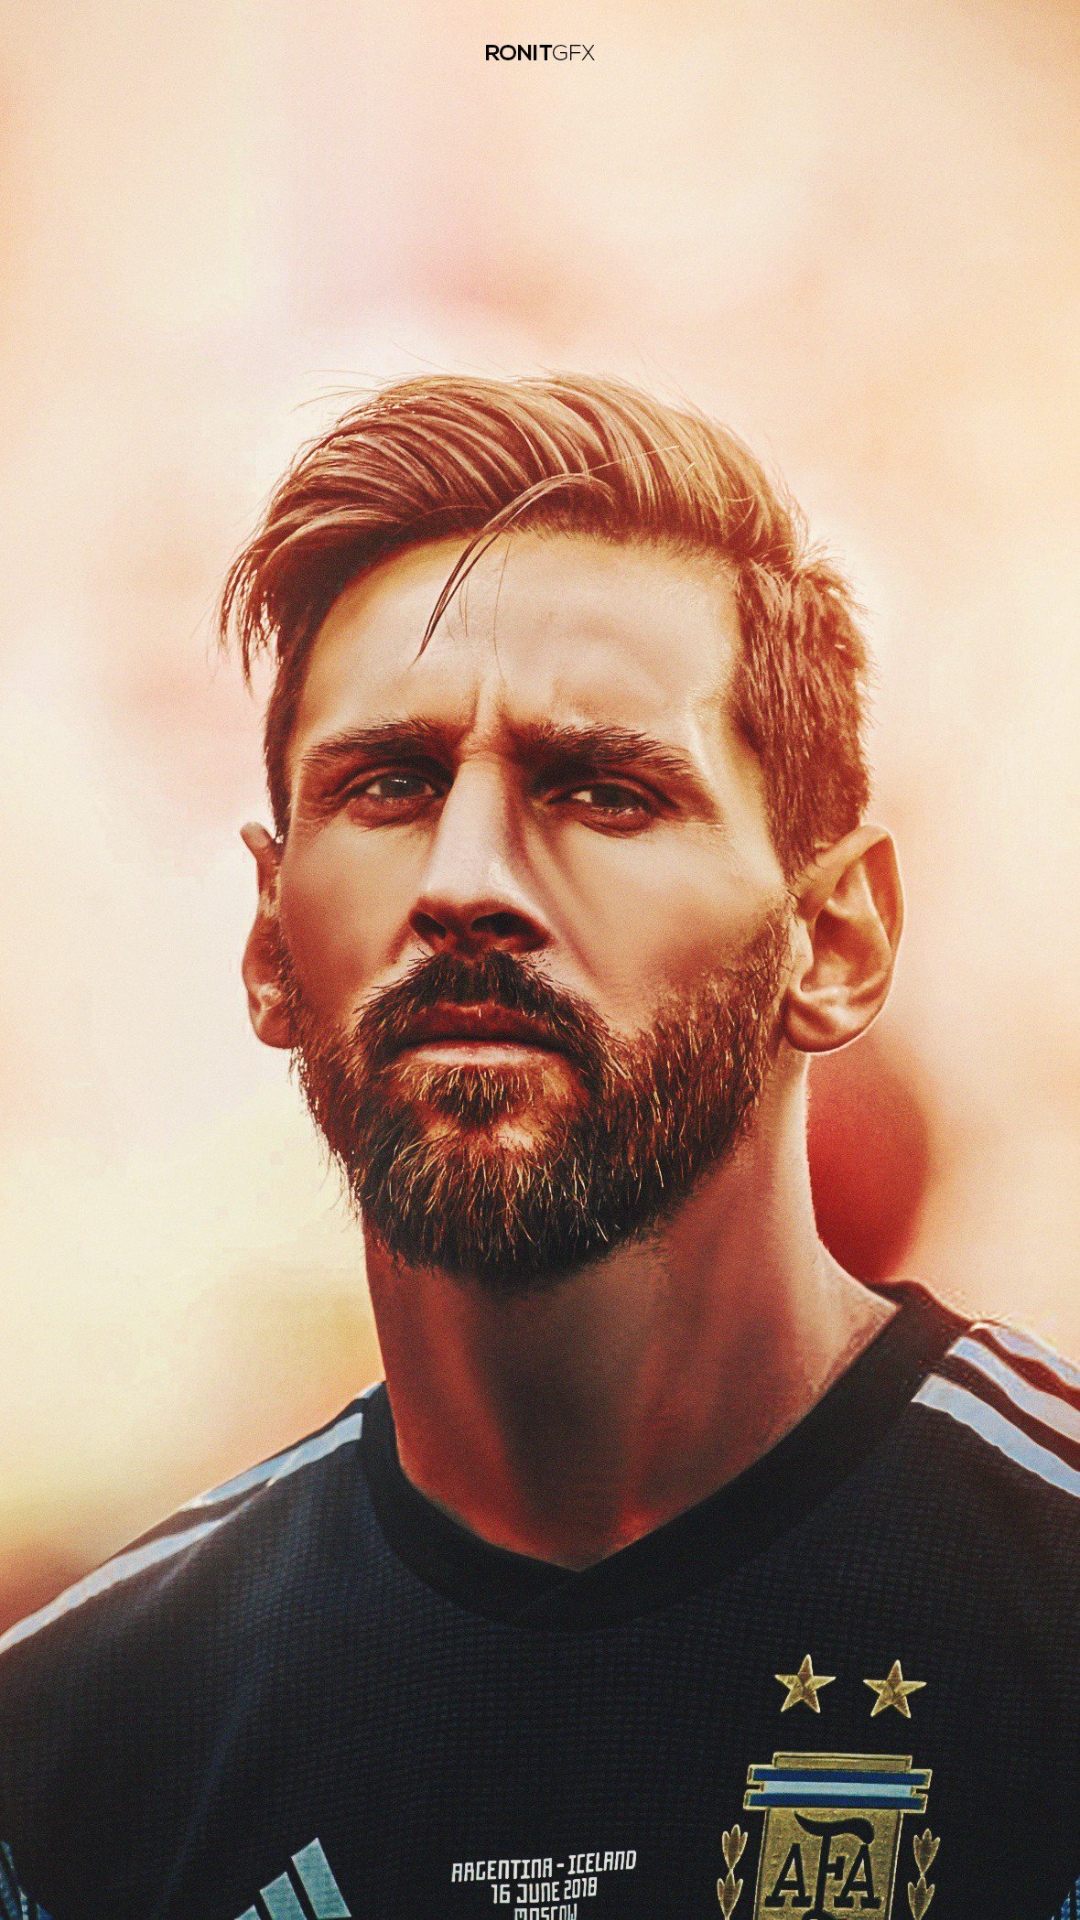 Cool Lionel messi Wallpaper Pictures